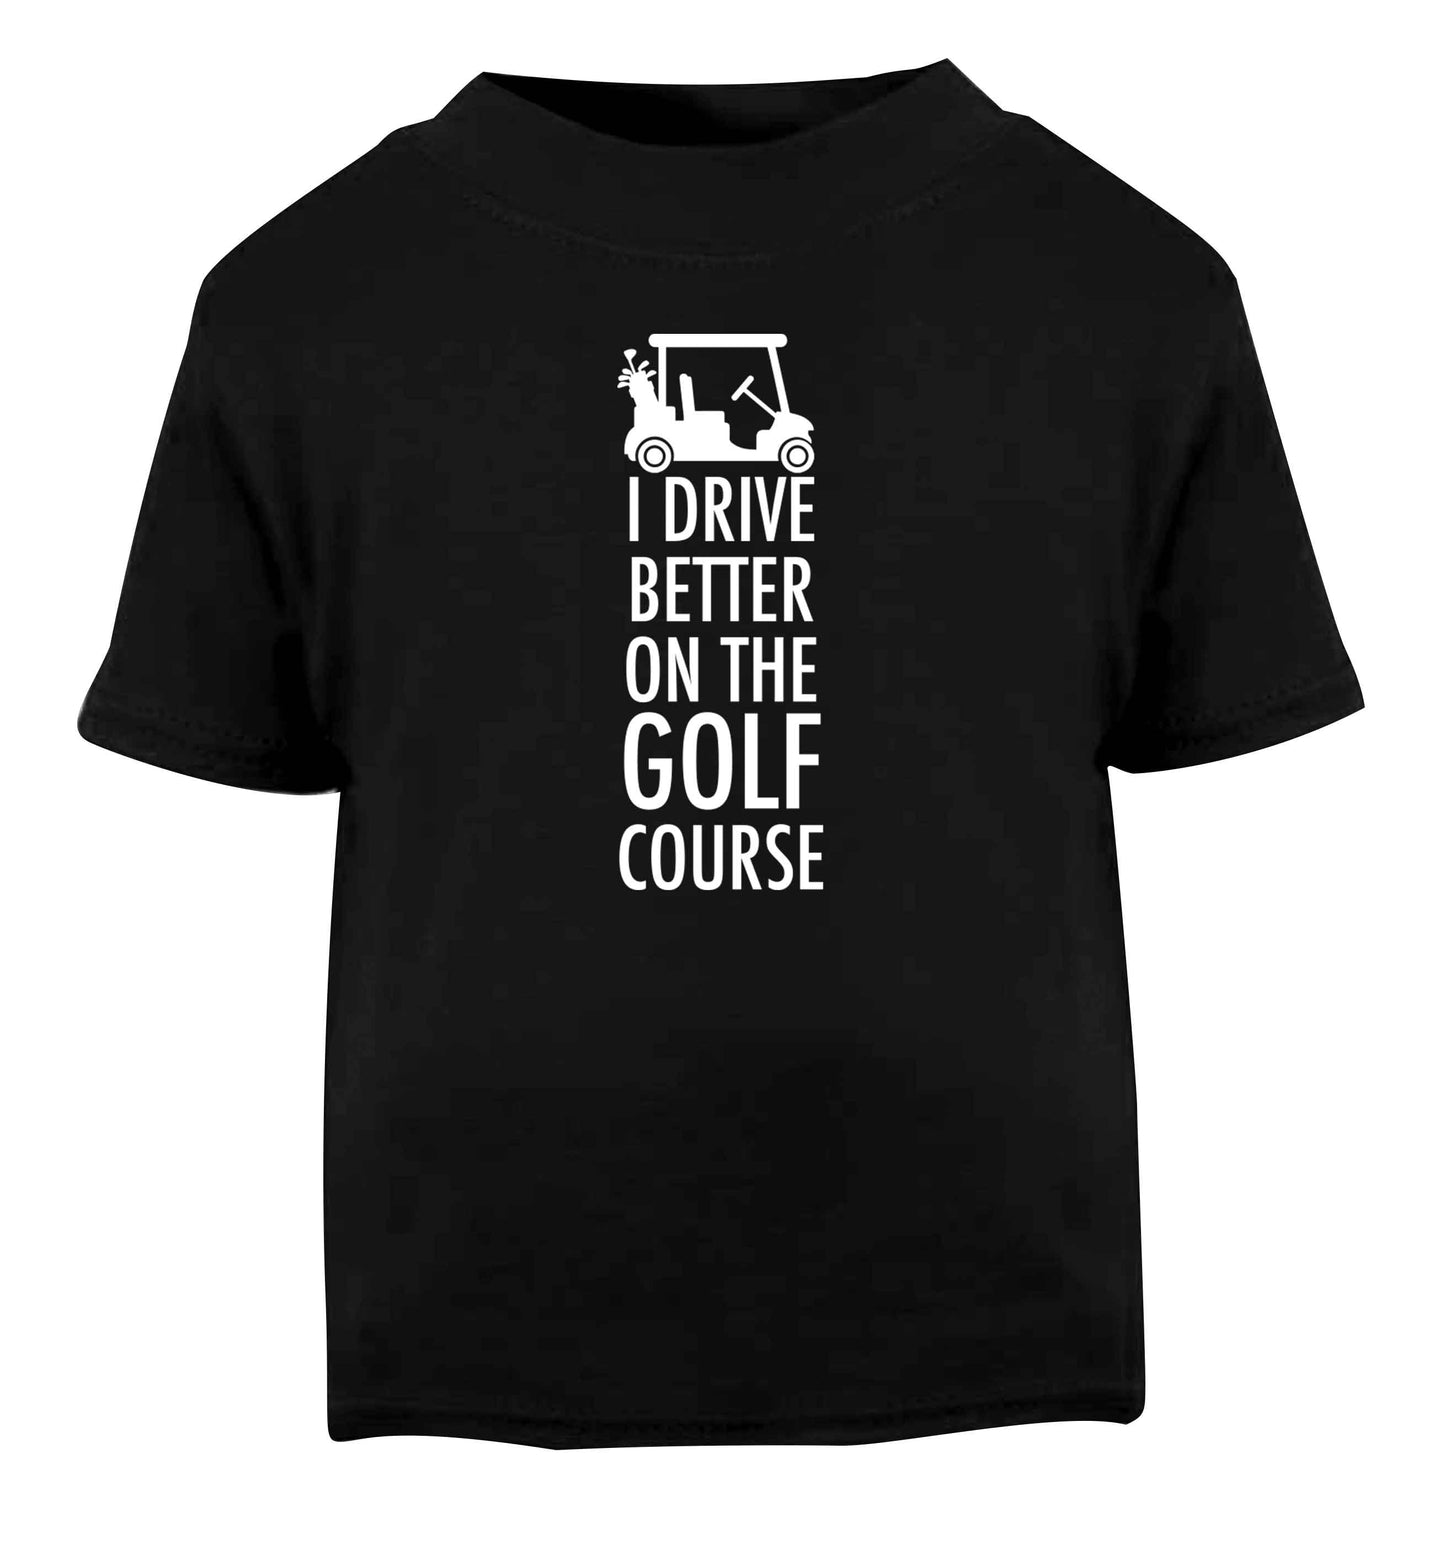 I drive better on the golf course Black Baby Toddler Tshirt 2 years